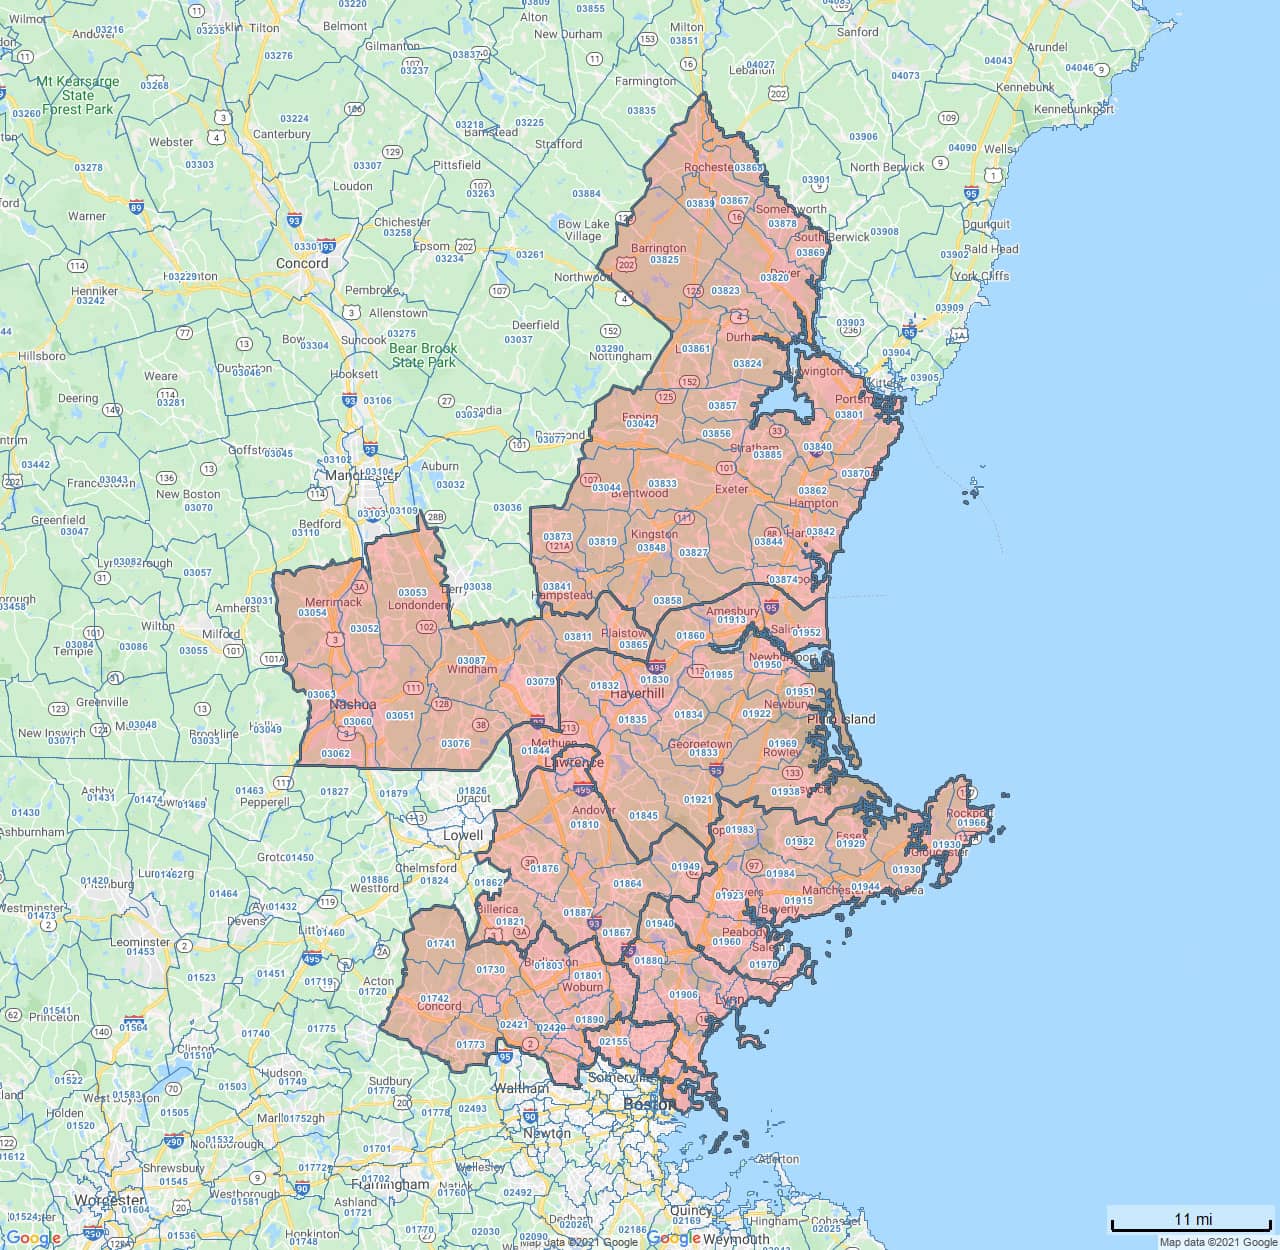 All Dry Services Area Coverage Map for Greater Boston / Southern New Hampshire